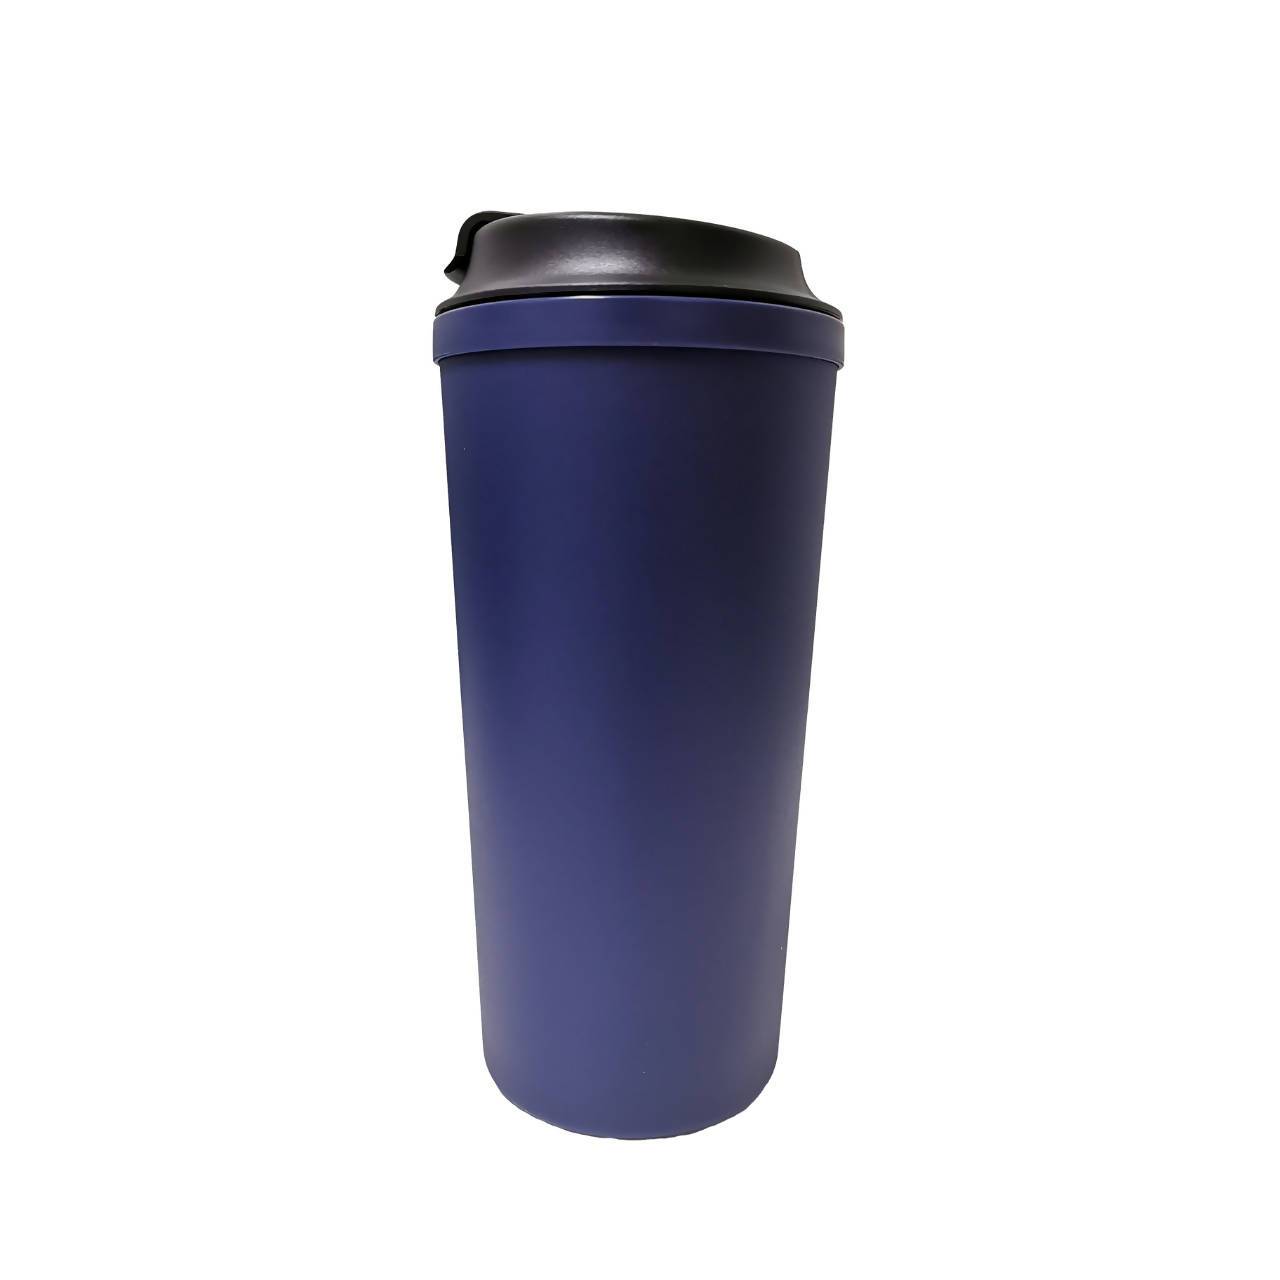 Artiart Suction Cafe Cup+ Cups Innovaid Dark Blue 